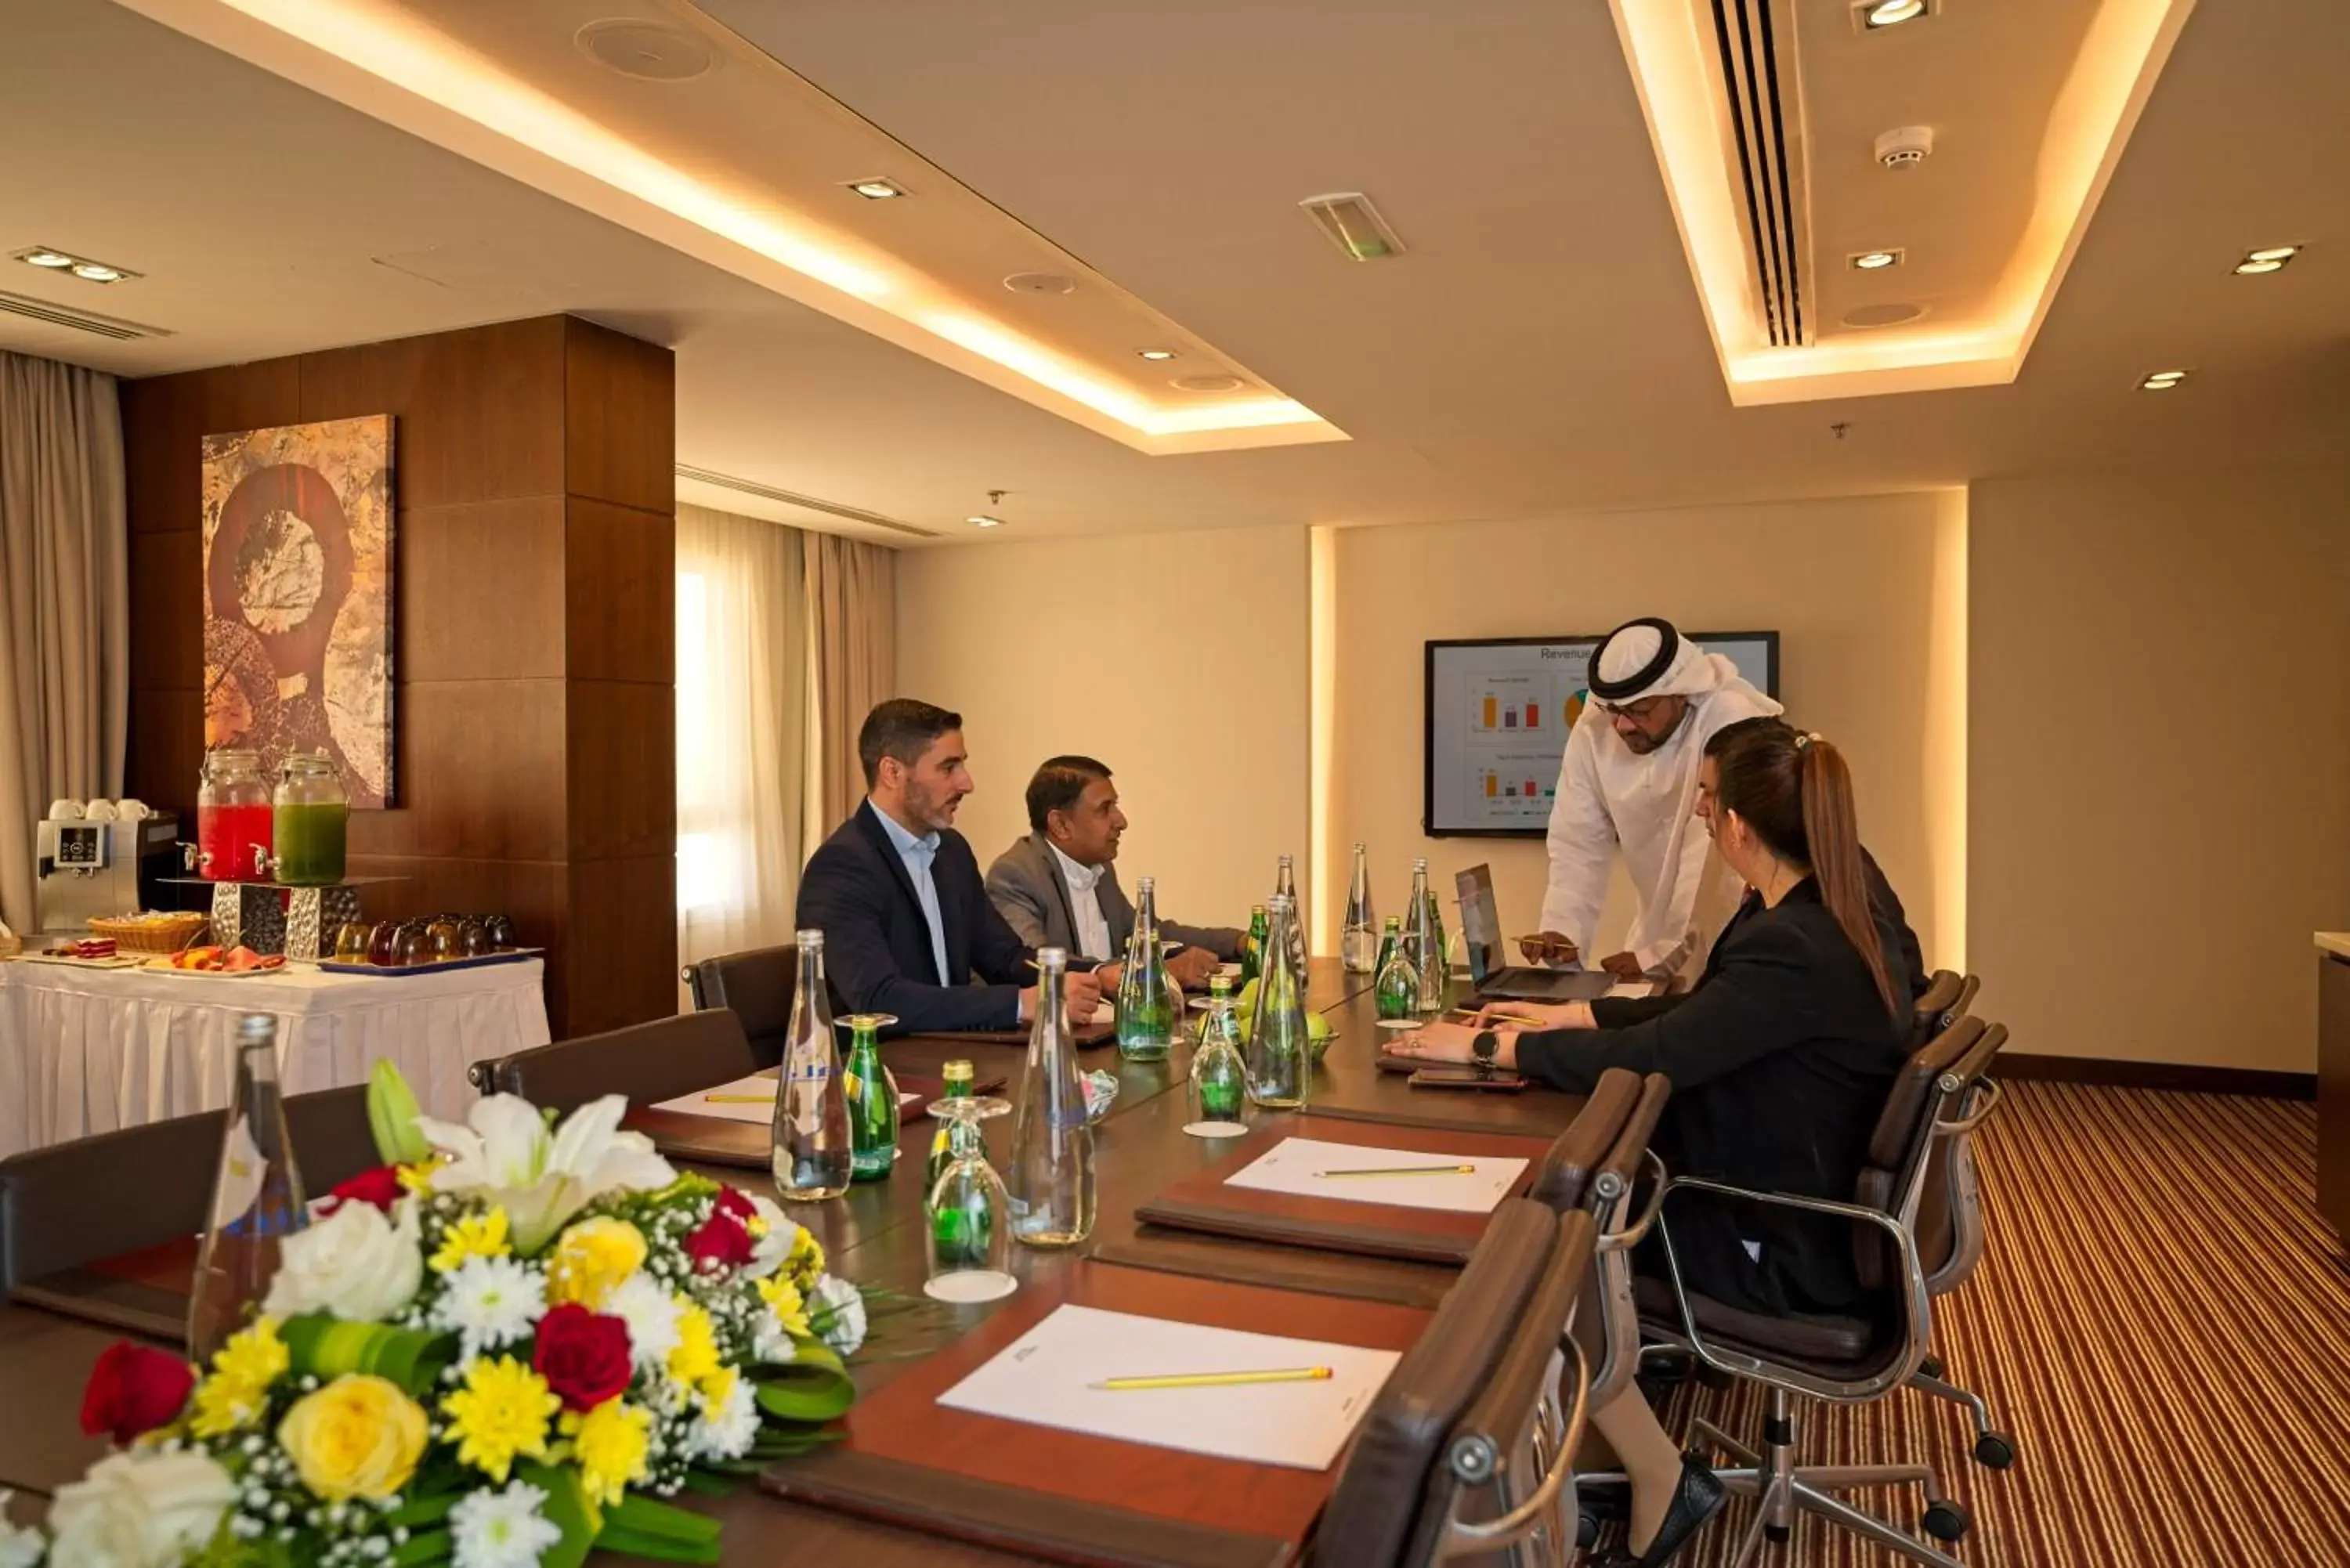 Meeting/conference room in Action Hotel Ras Al Khaimah